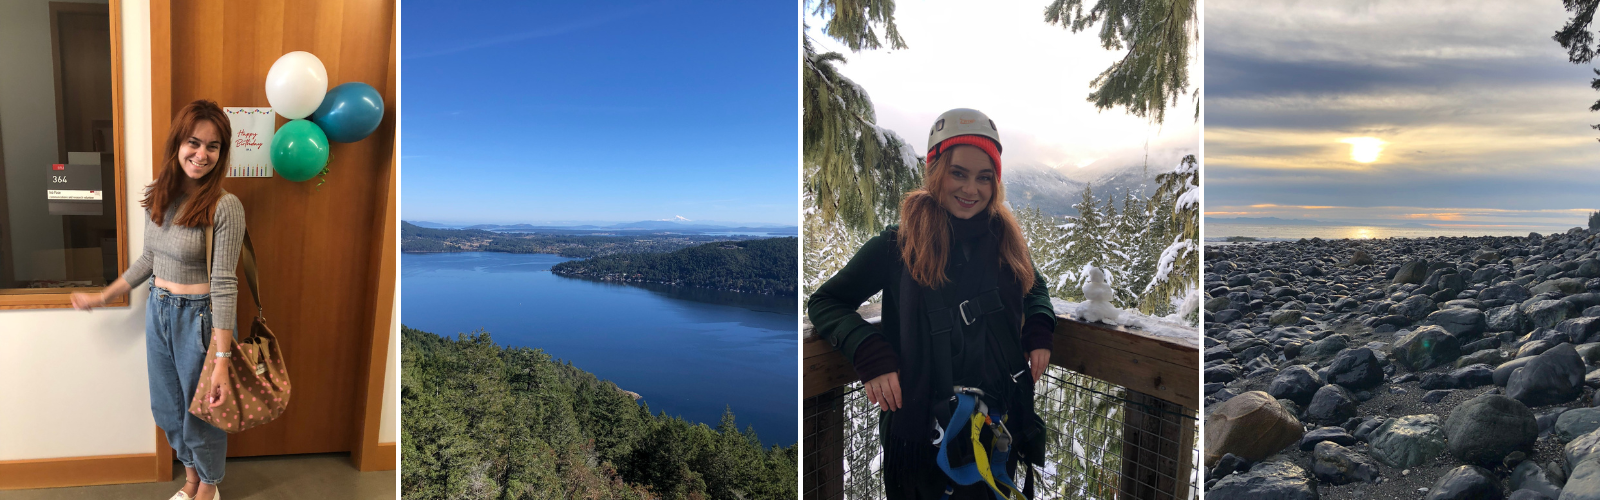 Four images in a grid: Ina on her birthday at the office, the panoramic view of the Burrard inlet, Ina in a healmet smiling after a winter zipline, and a rocky beach with the setting sun in the background